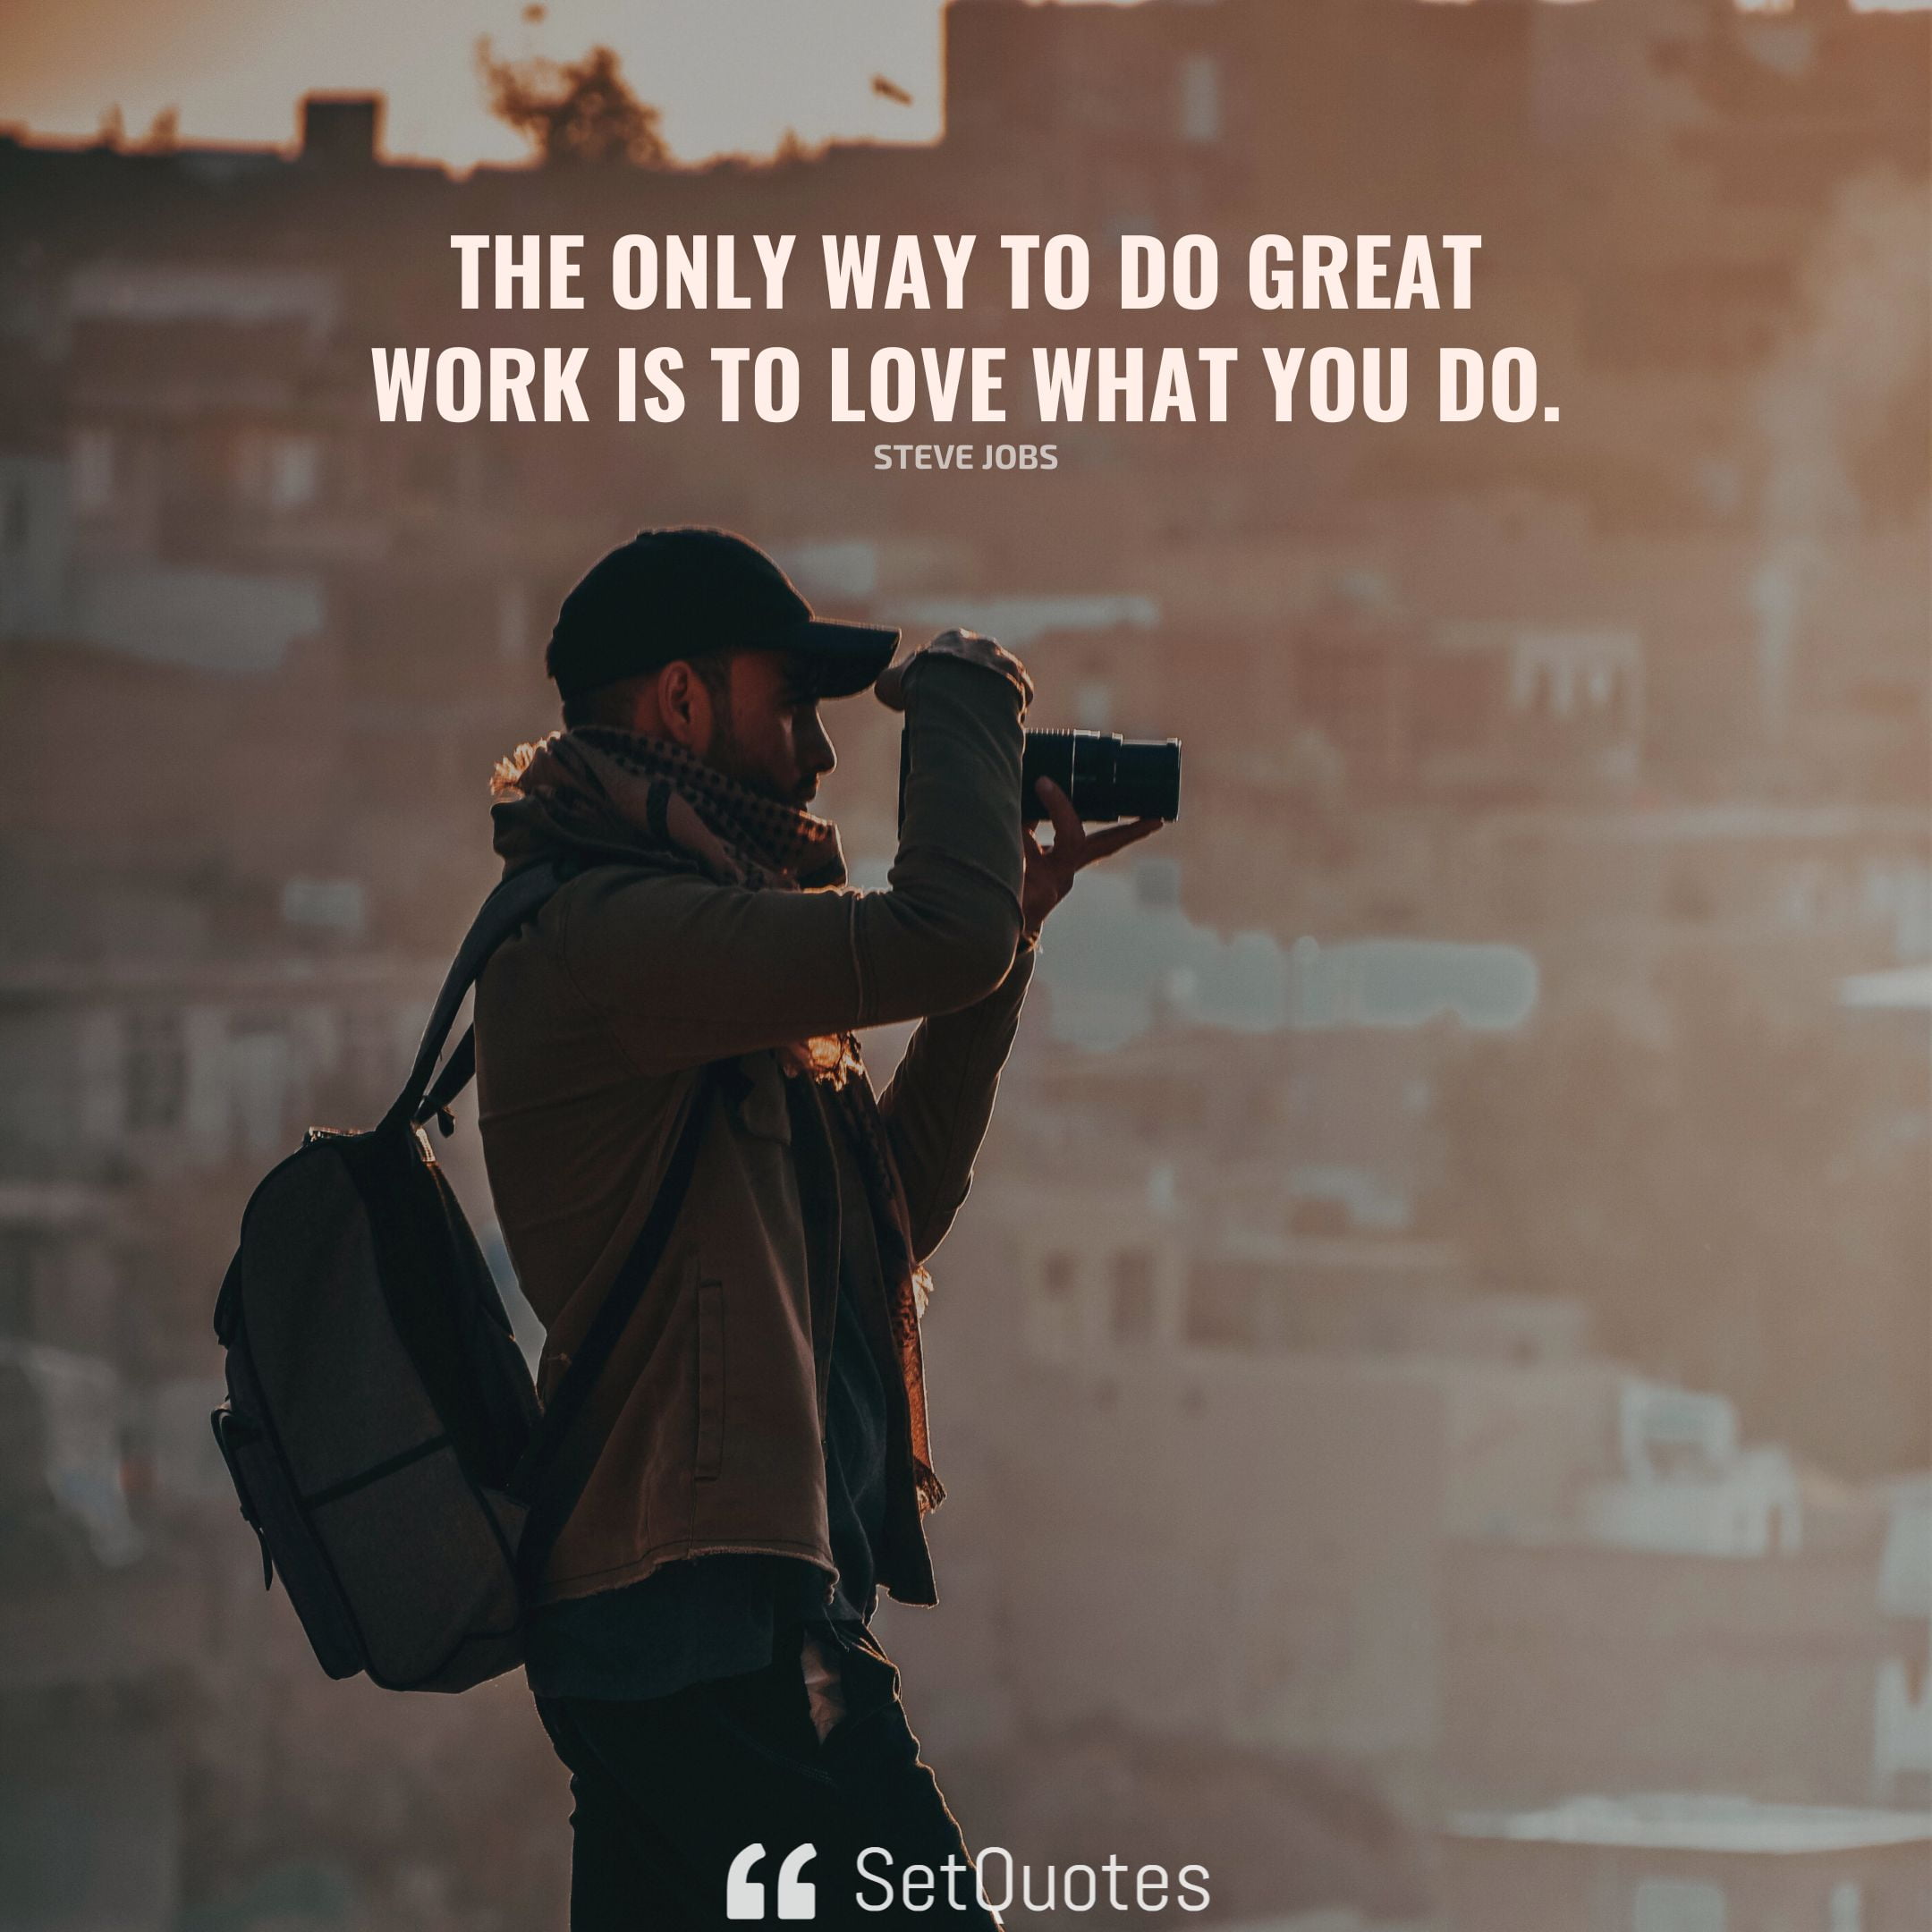 The only way to do great work is to love what you do. - Steve Jobs - SetQuotes